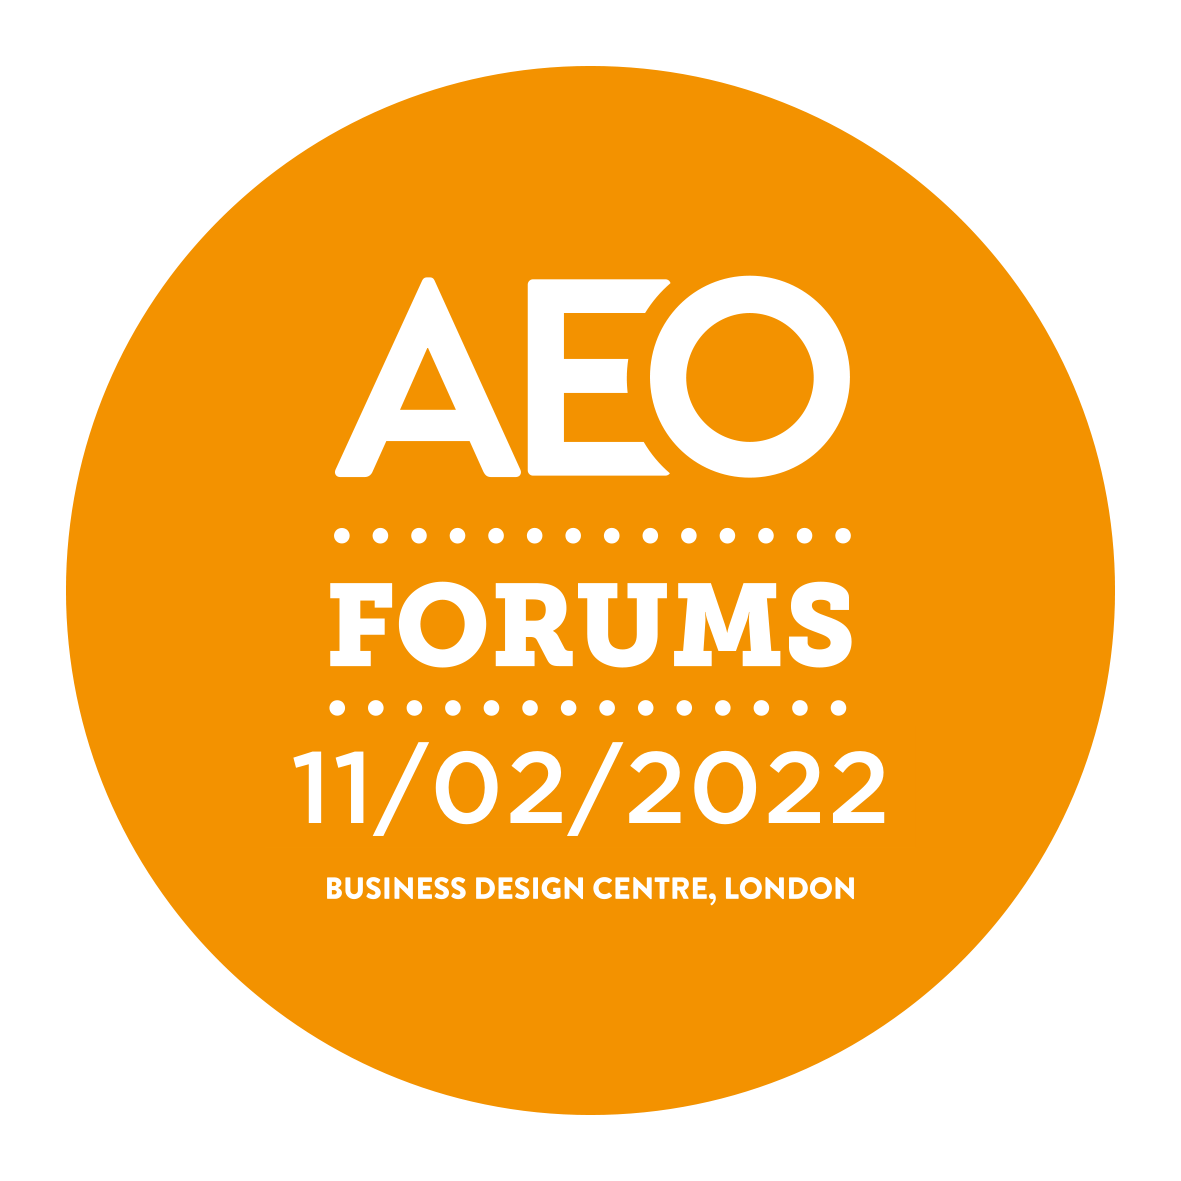 AEO Forums 2022 Launches